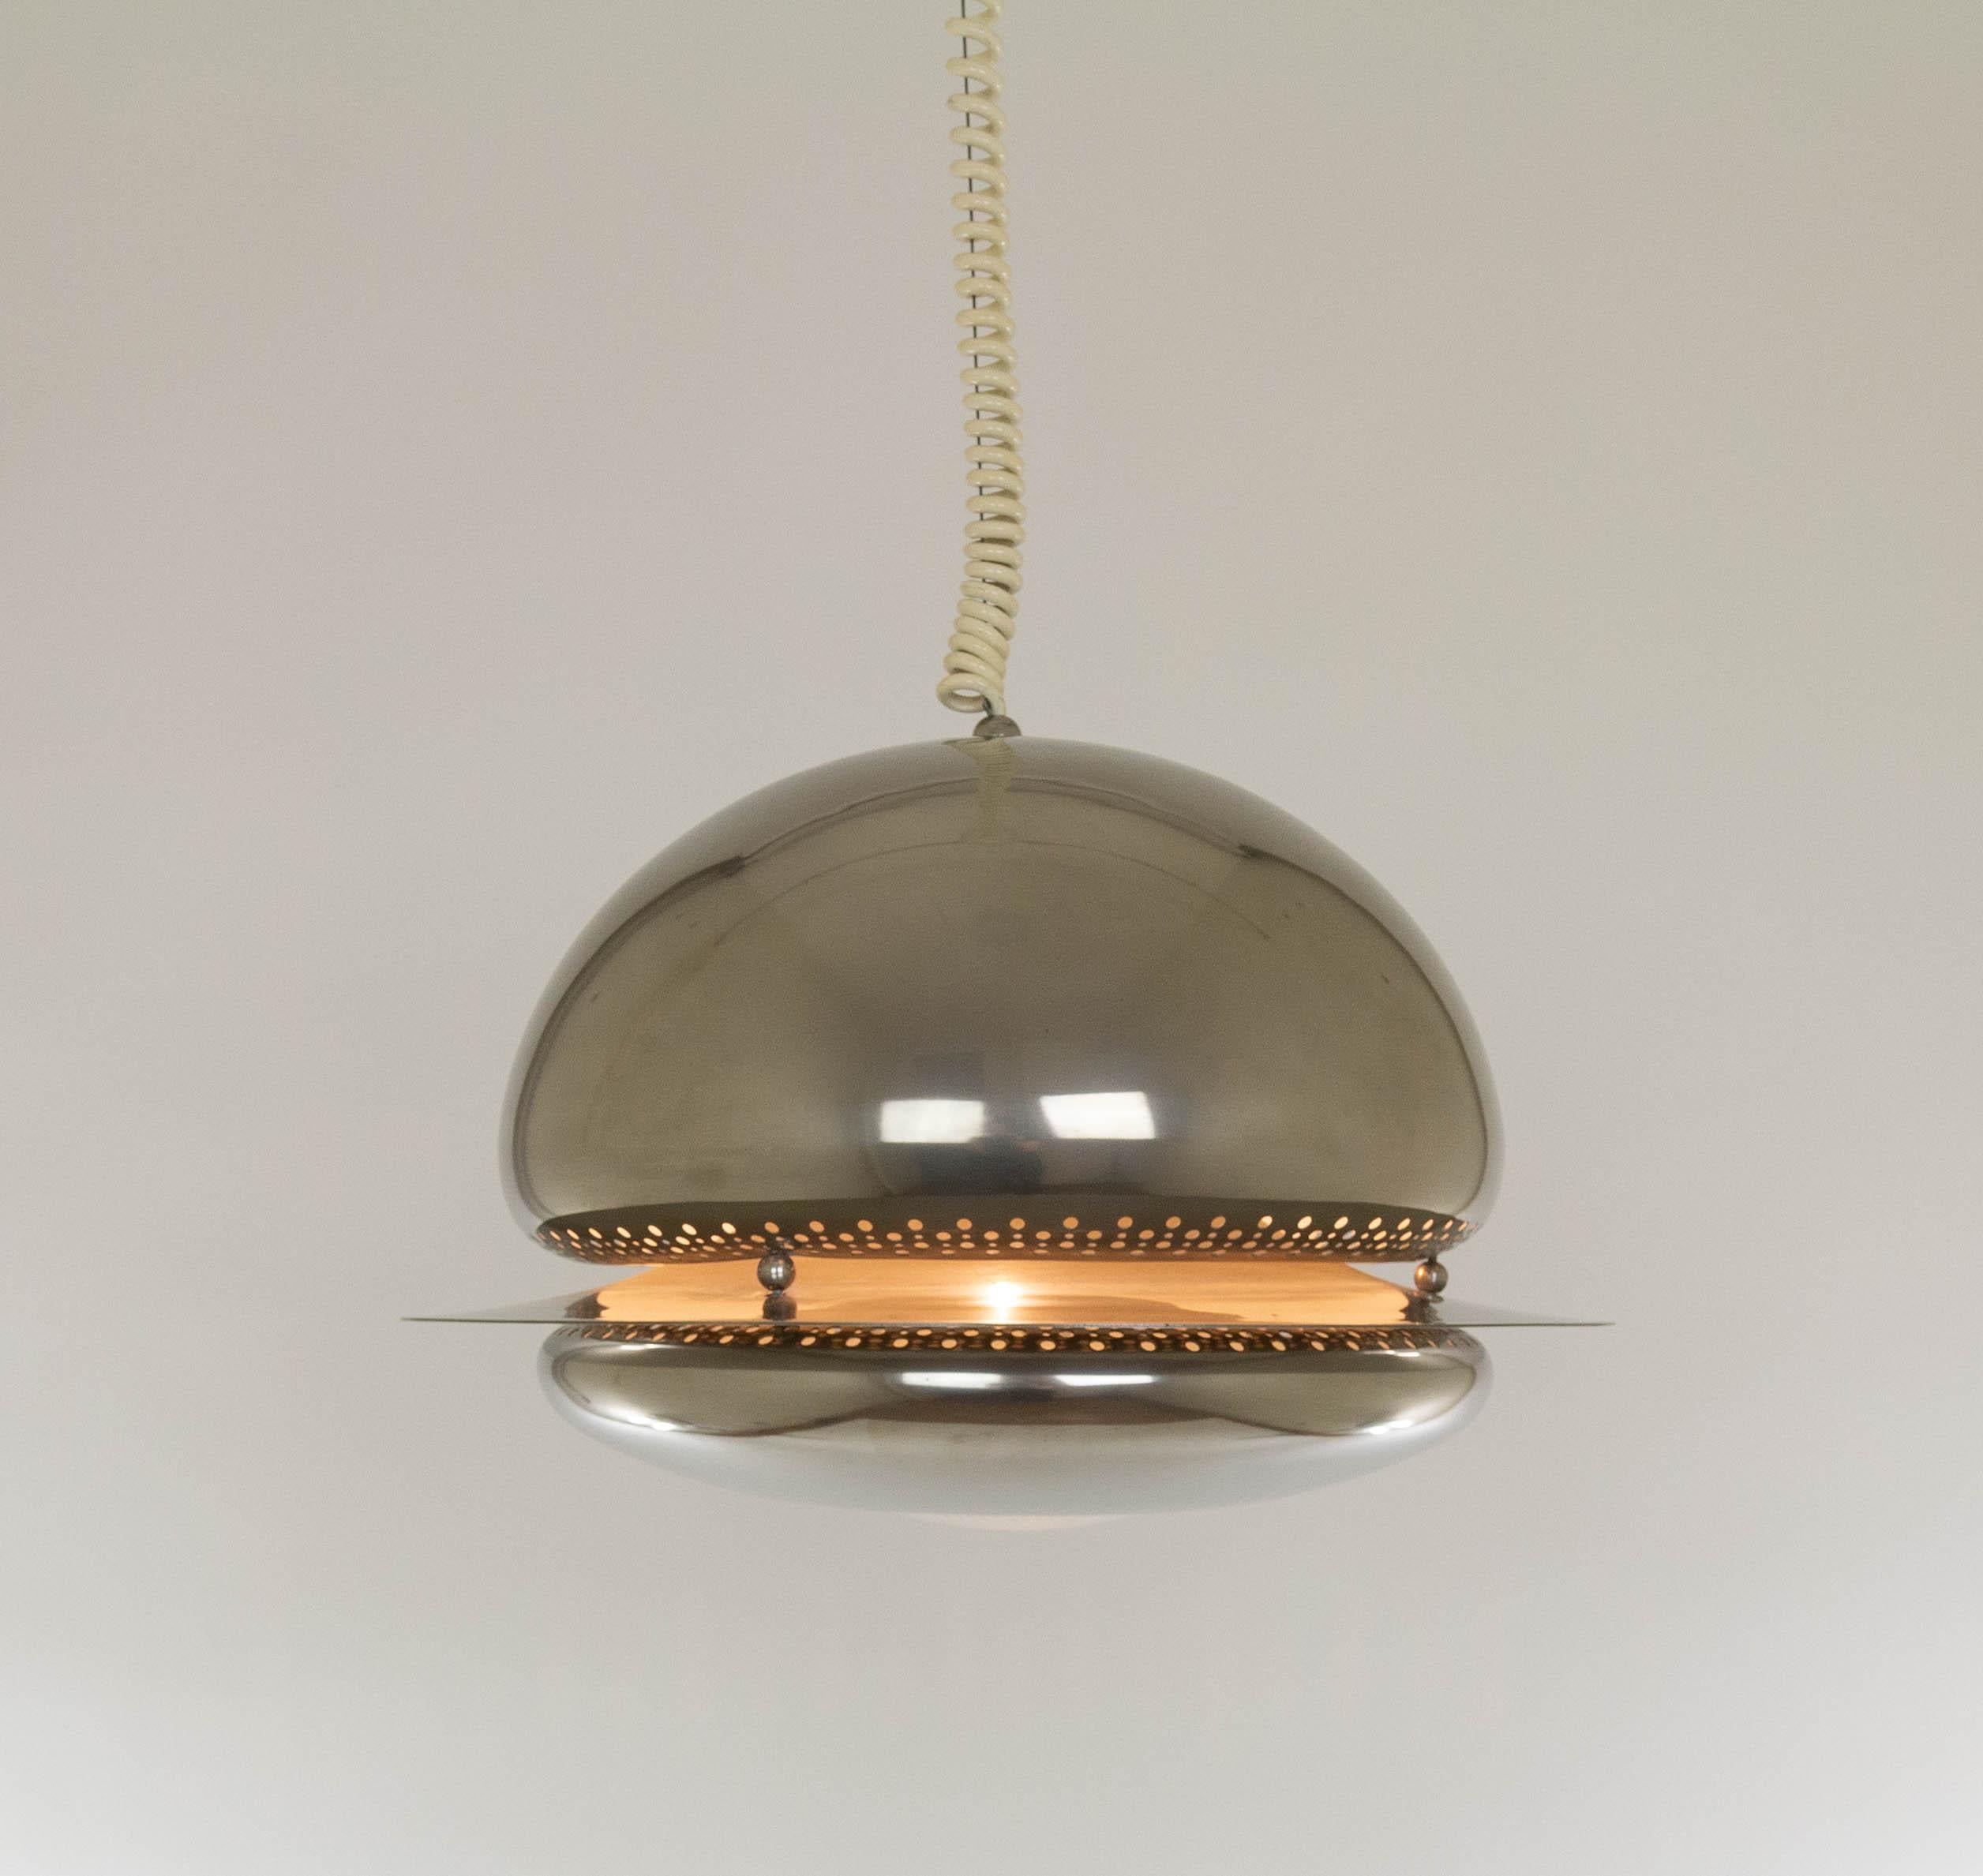 Nickel-plated Nictea pendant designed by Tobia and Afra Scarpa for Italian Lighting manufacturer Flos in 1963.

In a Flos catalogue from the 1970s we found this description: 